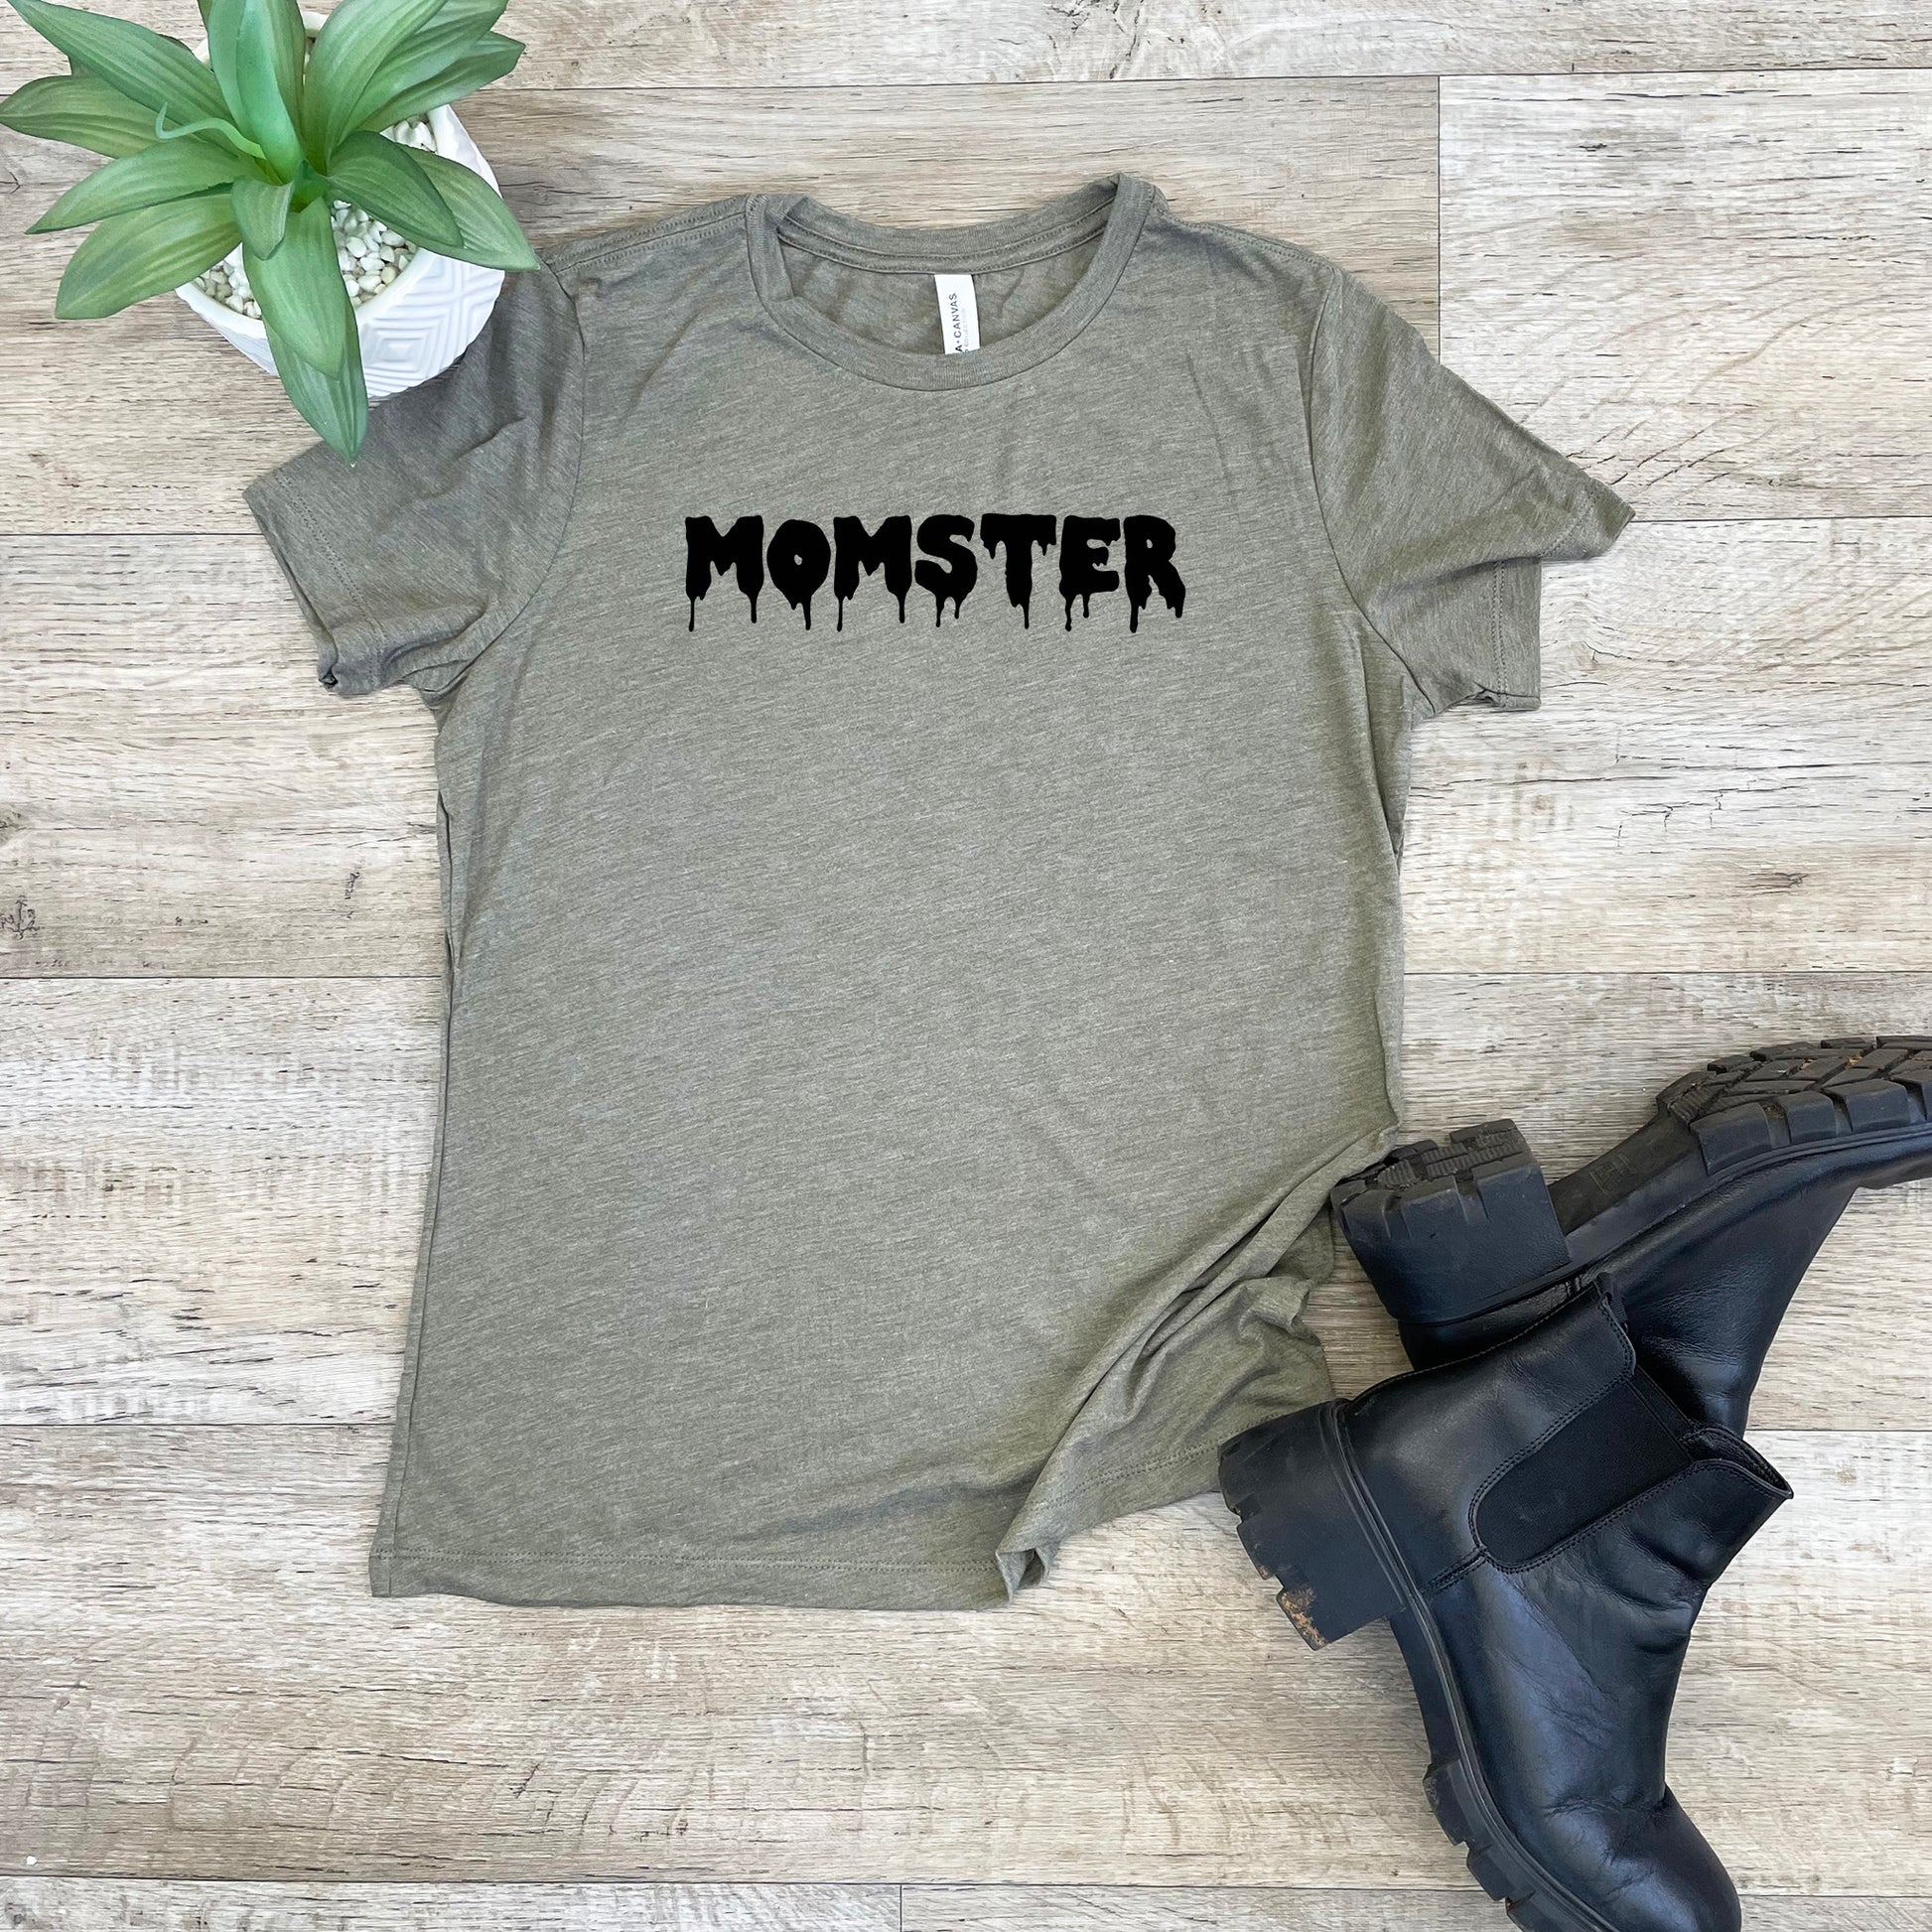 a t - shirt with the word monster on it next to a pair of black